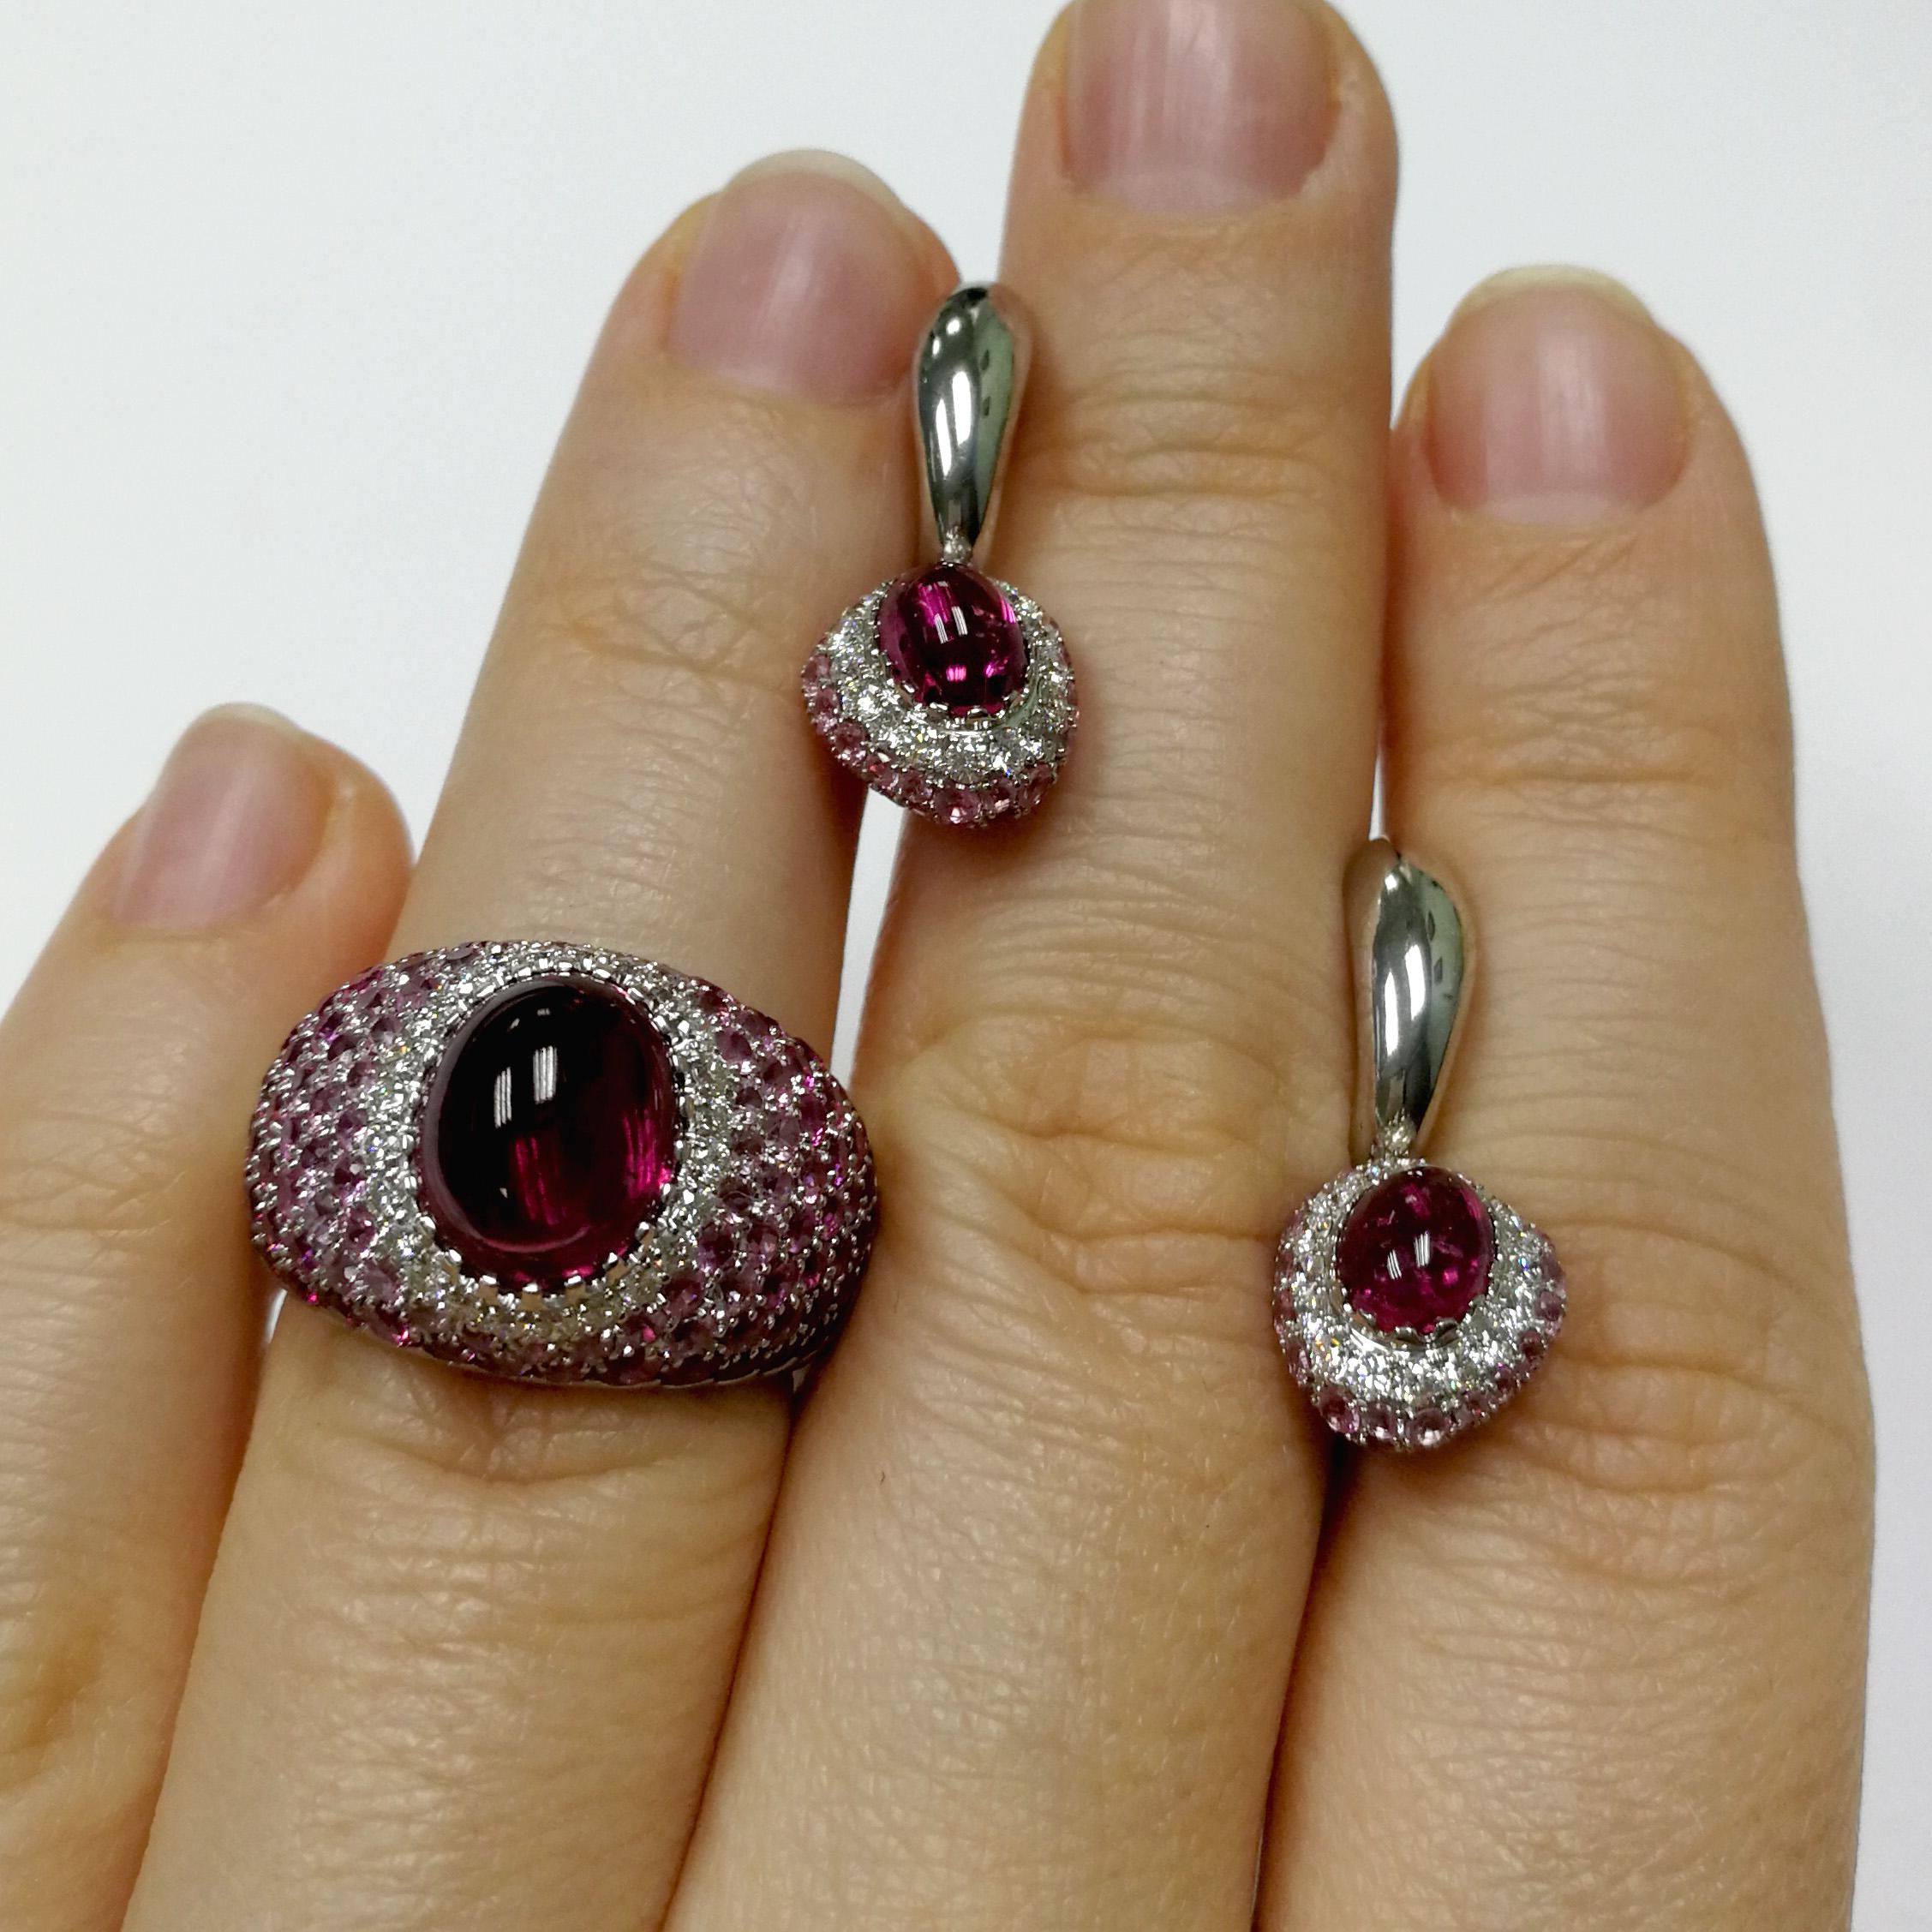 Rubelites Rubies Diamonds Pink Sapphires White 18 Karat Gold Riviera Suite
The name and the variety of colours in this collection are associated with the bright Italian and French Riviera, vivid and colourful houses and sun reflections on the water.